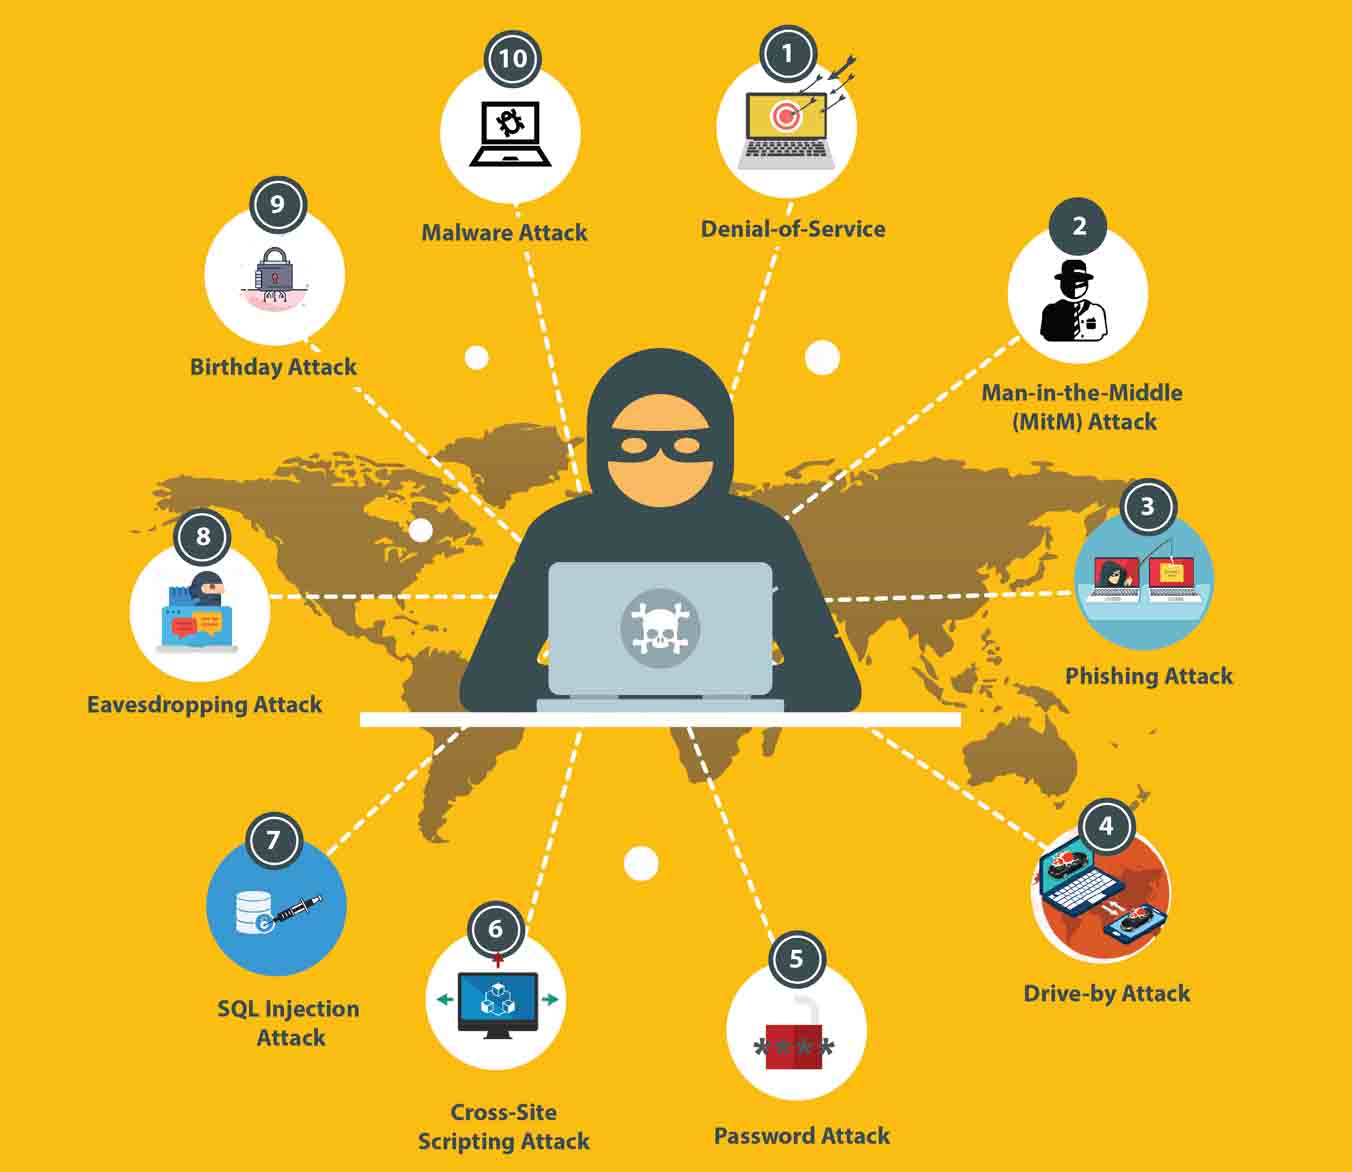 different types of cyber security attacks
yellow figure depicting cyber security attacks type